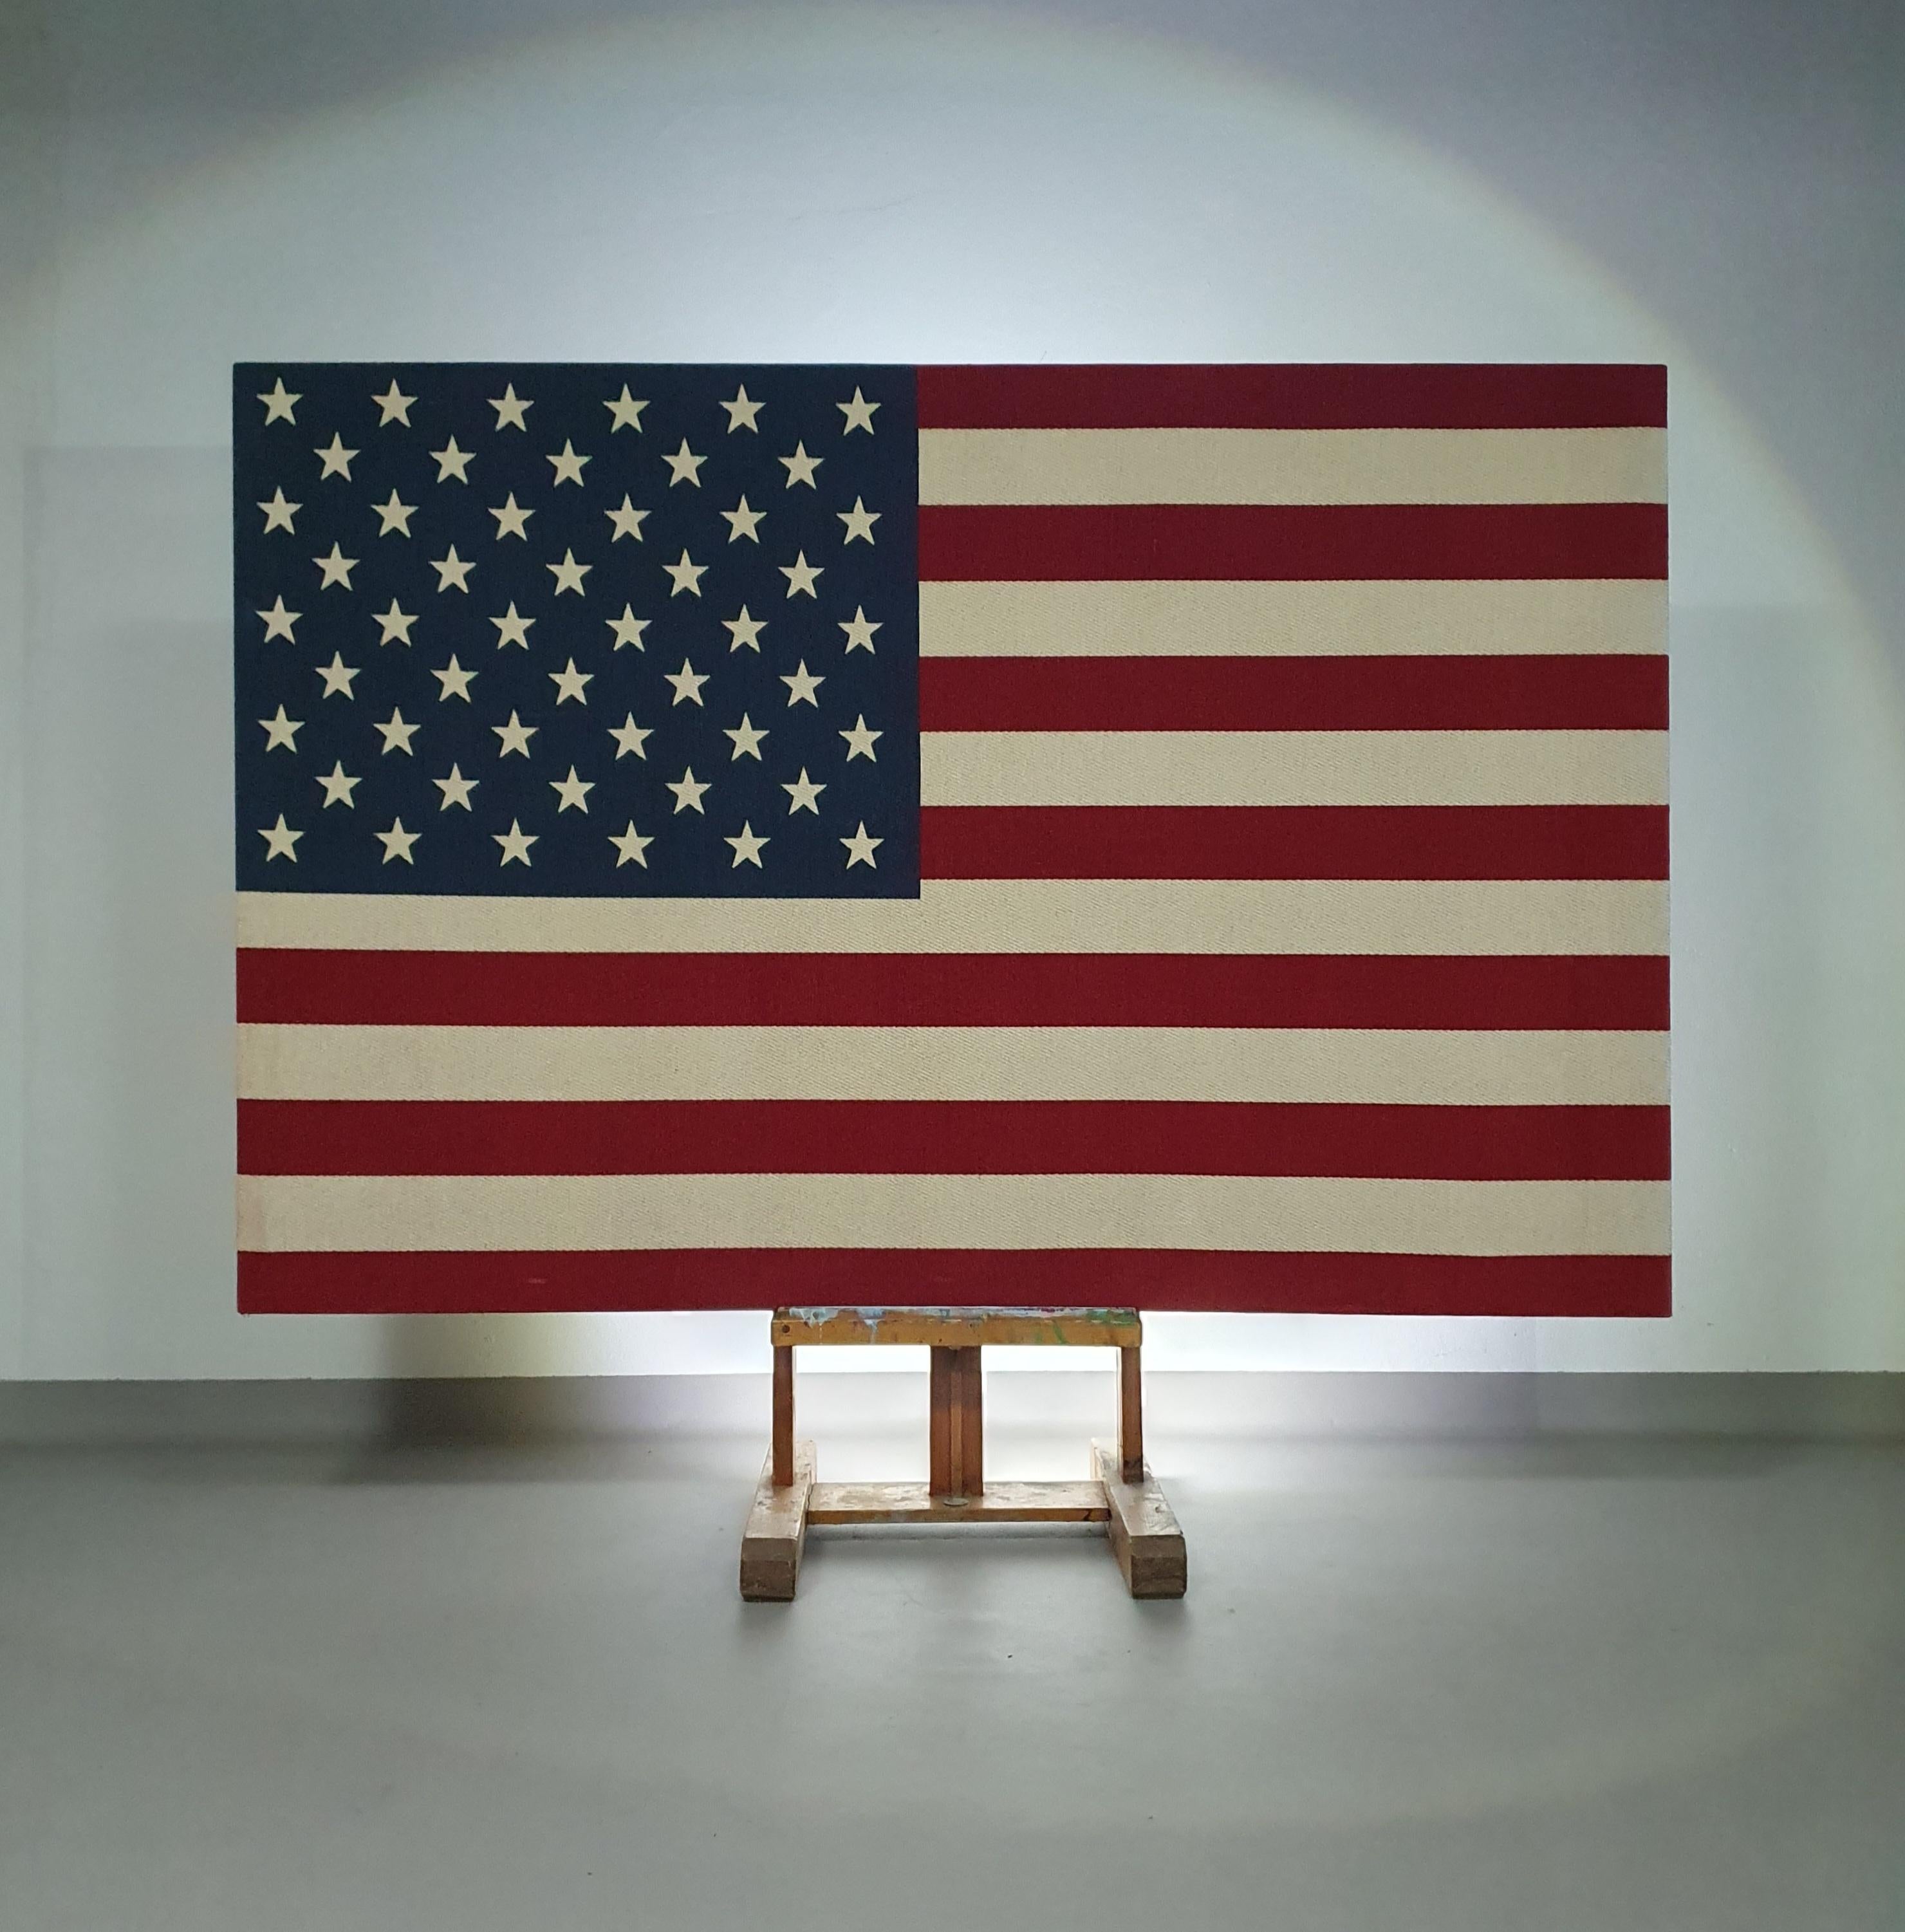 American woven silk flag / stars and stripes / assembled on a wooden frame
Wide 193 cm
Height 130 cm
Depth 2.5 cm

The woven  silk flag will be shipped disassembled in a cardboard tube